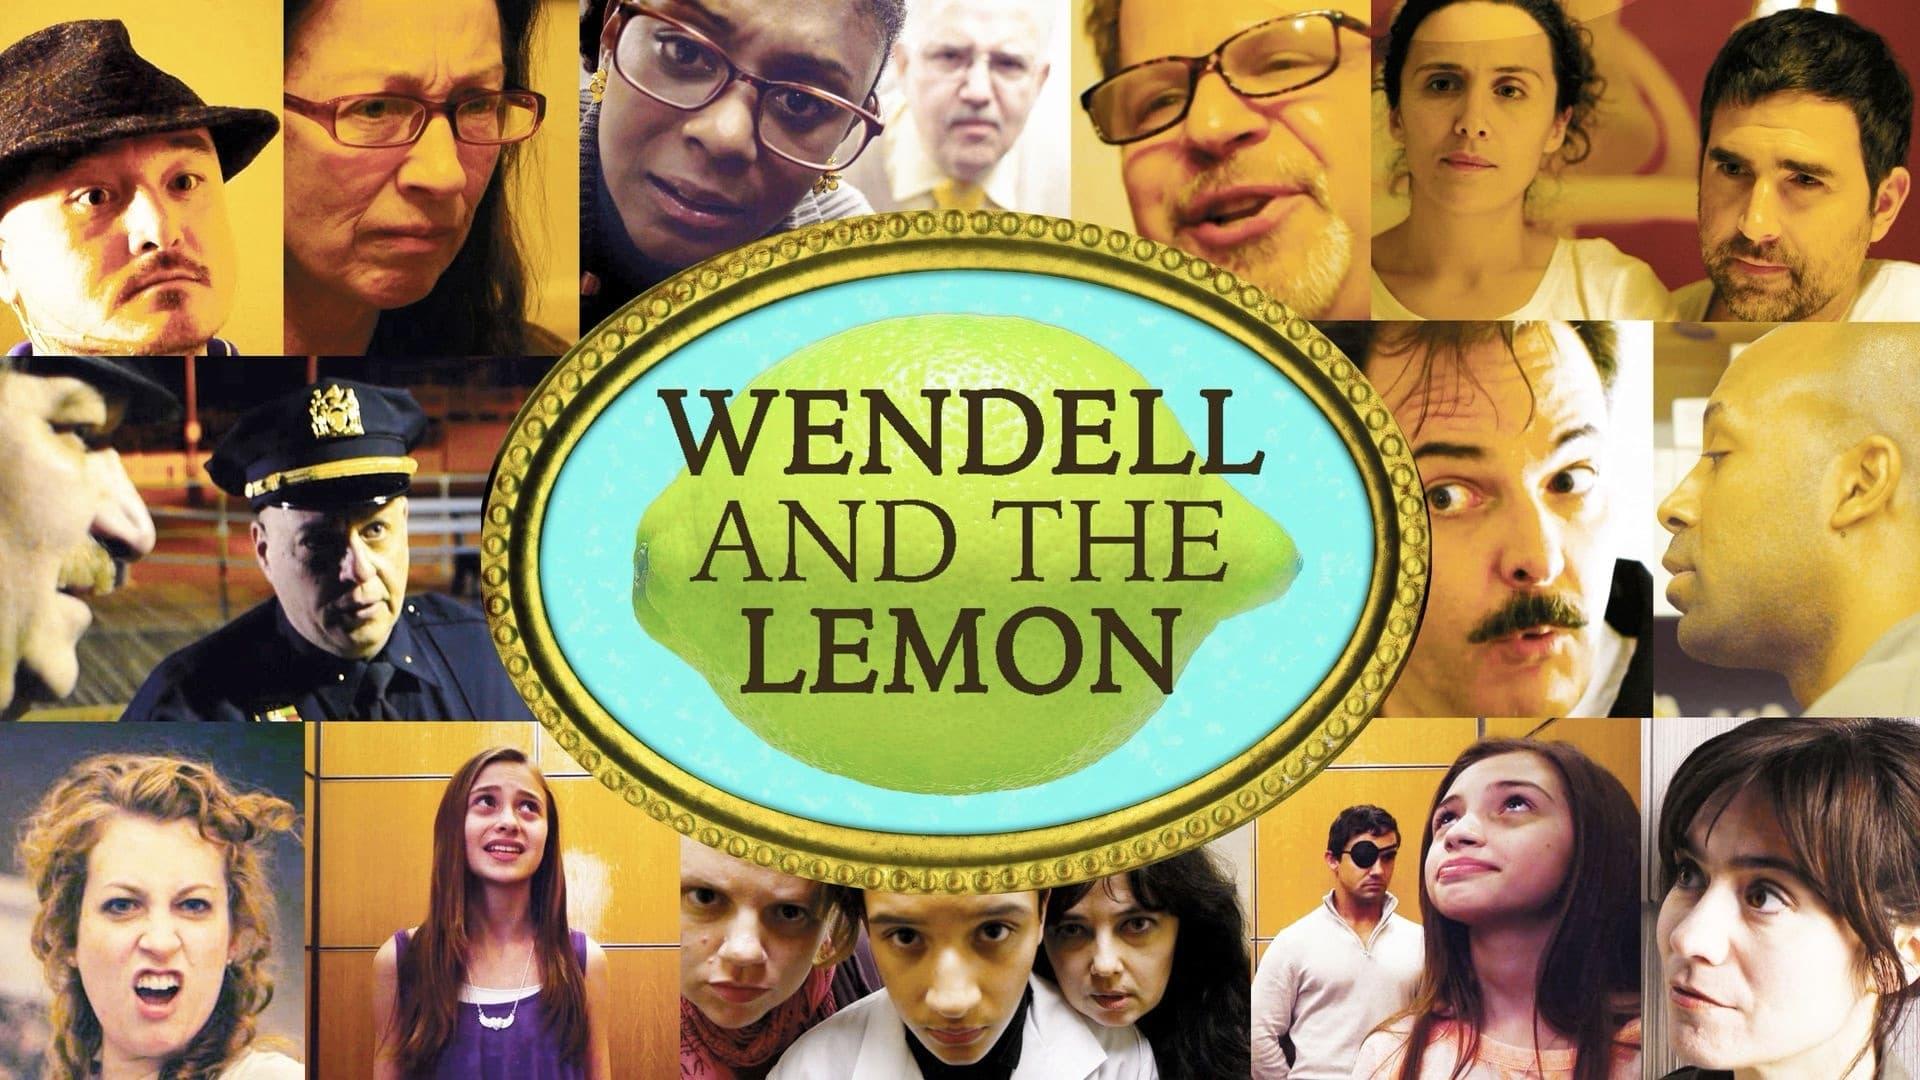 Wendell and the Lemon backdrop